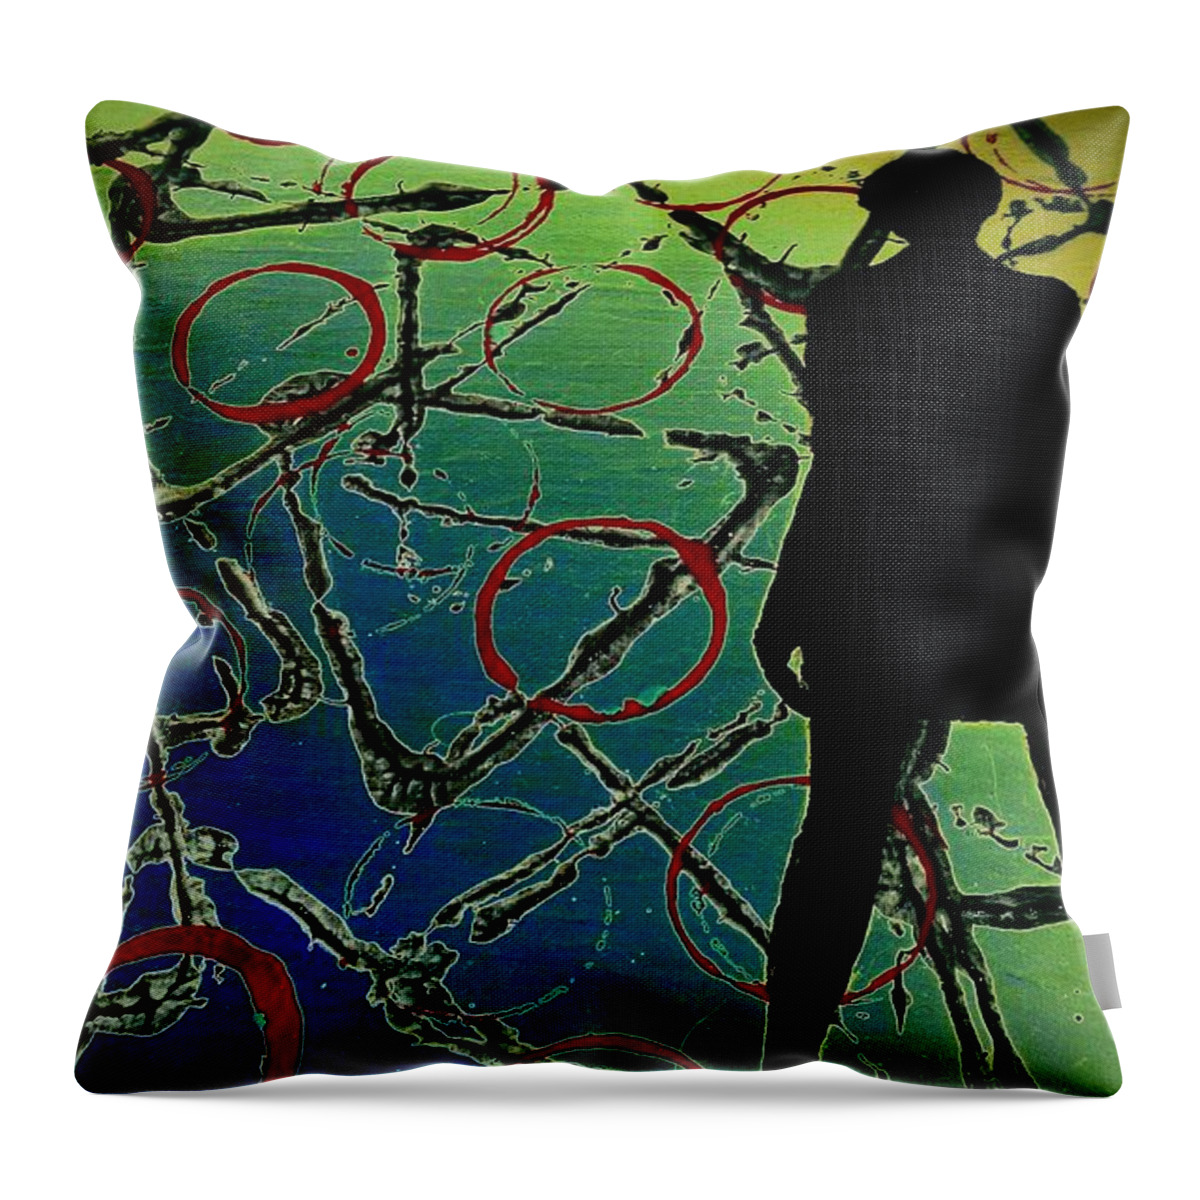 Future Throw Pillow featuring the painting Her Future Is Now by Jacqueline McReynolds